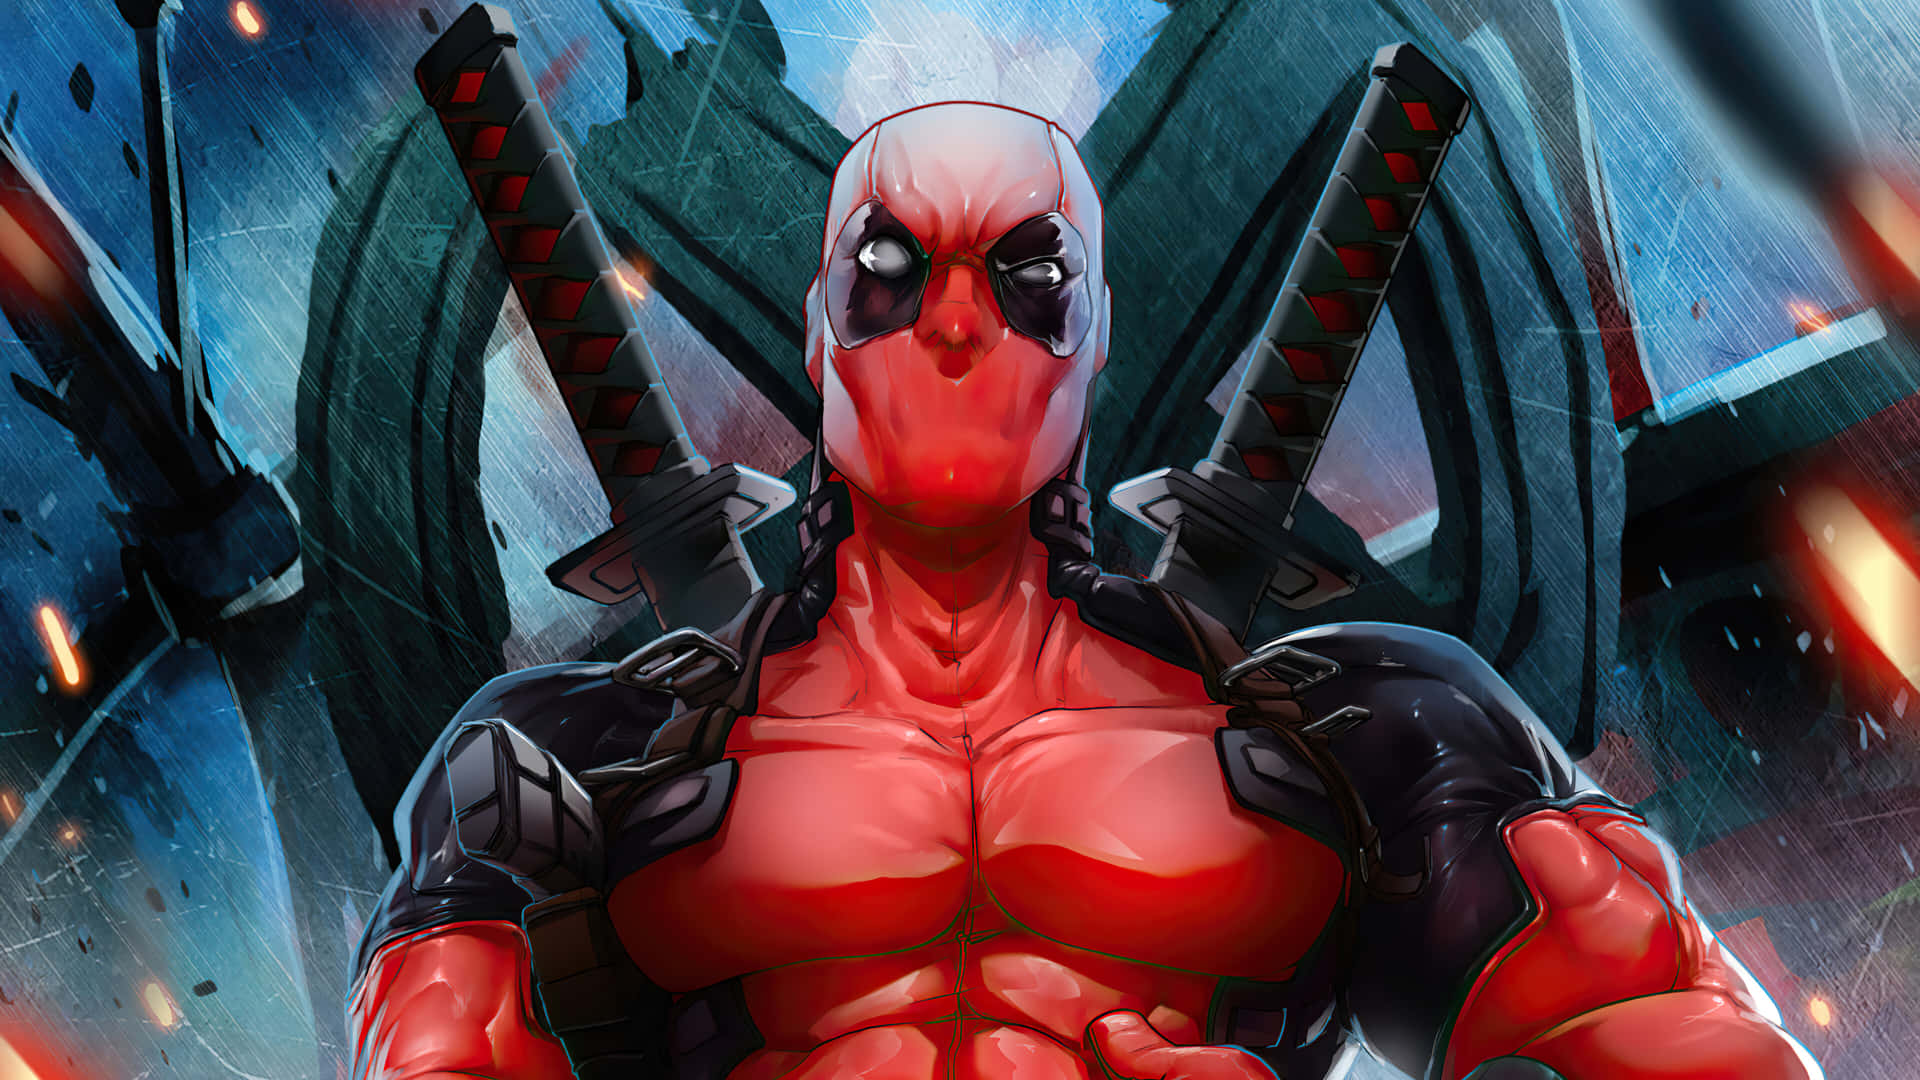 Deadpool fighting for justice with a fearless attitude